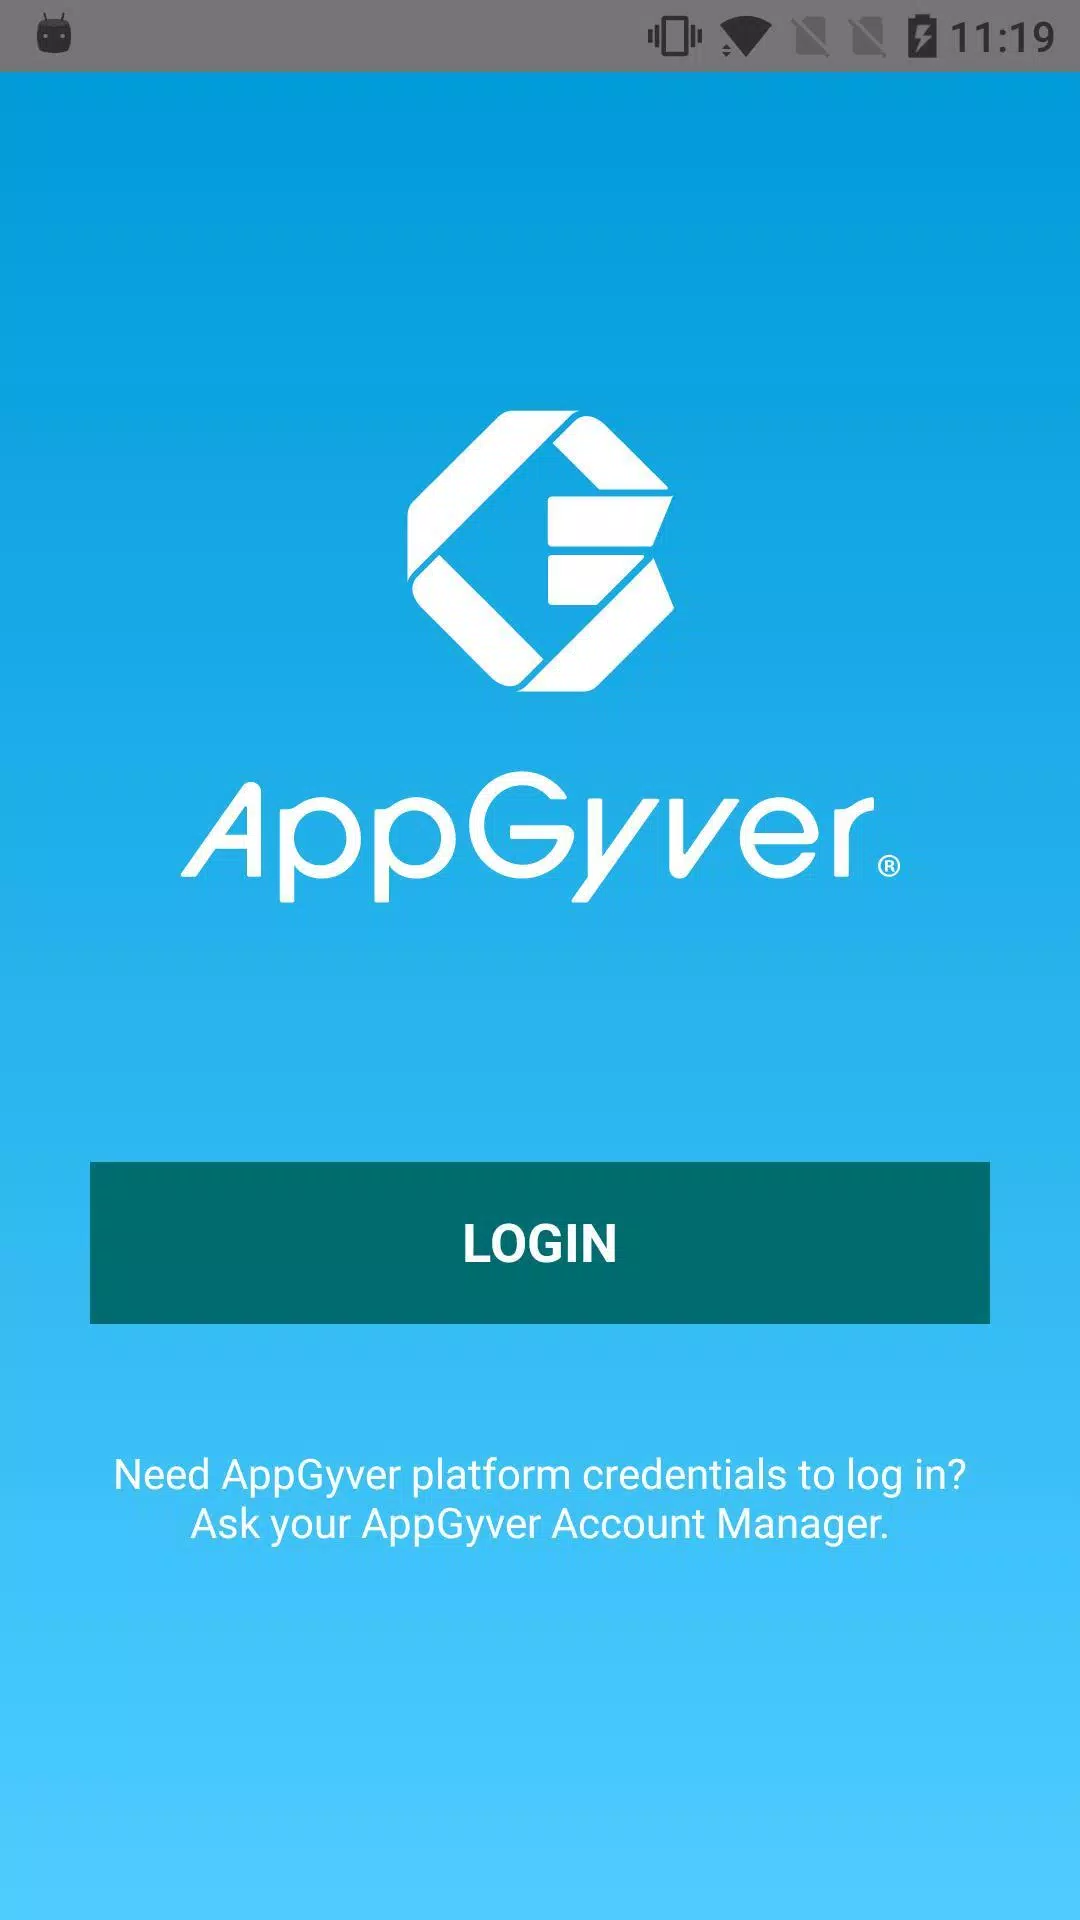 Download Test App to my Android - Question - AppGyver